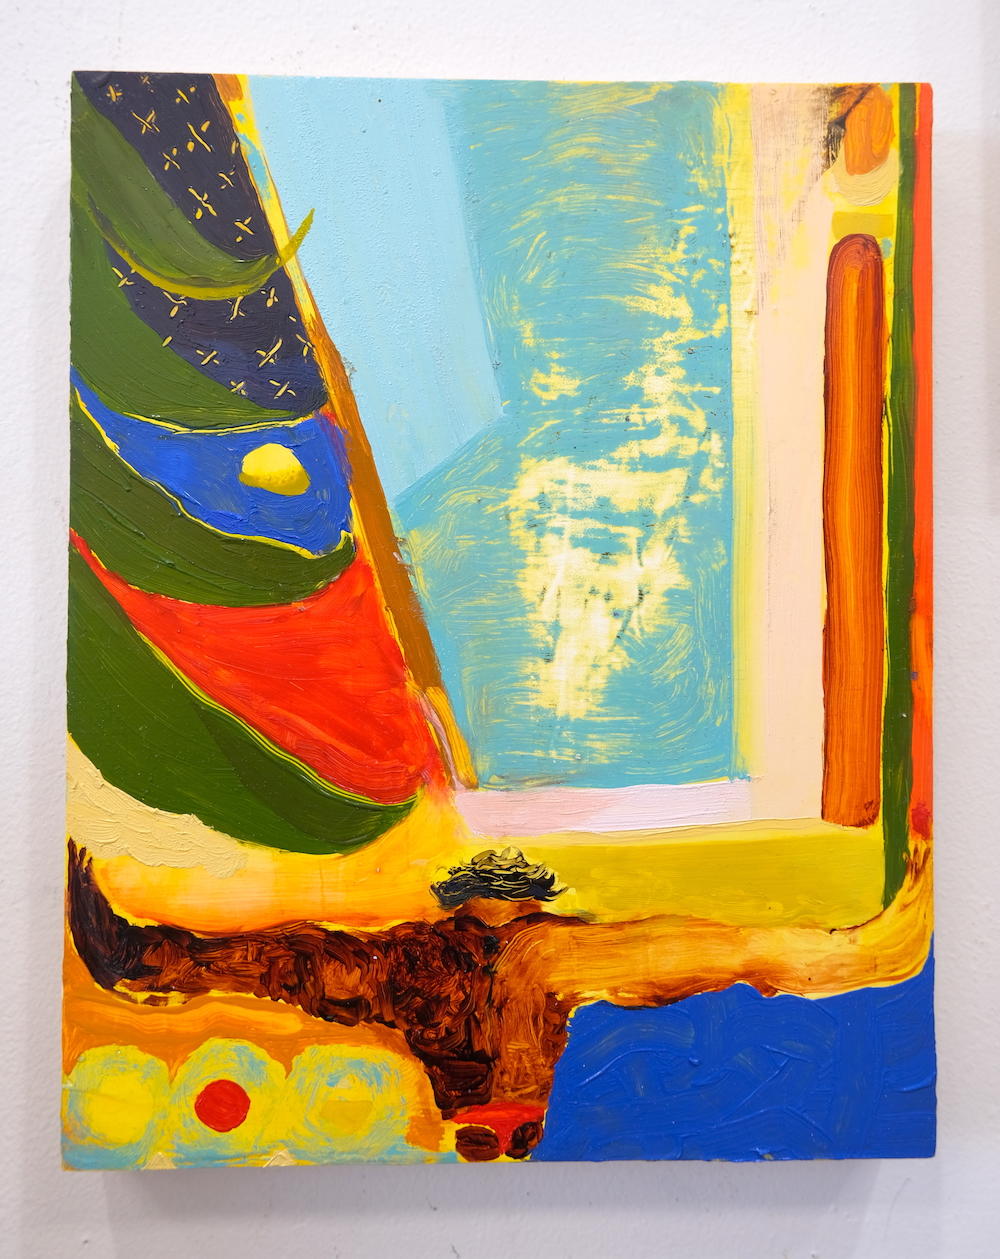 Photo of a small oil painting in primary colors. A figure with arms outstretched in a "T" at the bottom of the panel holds up the painting and faces a pool.